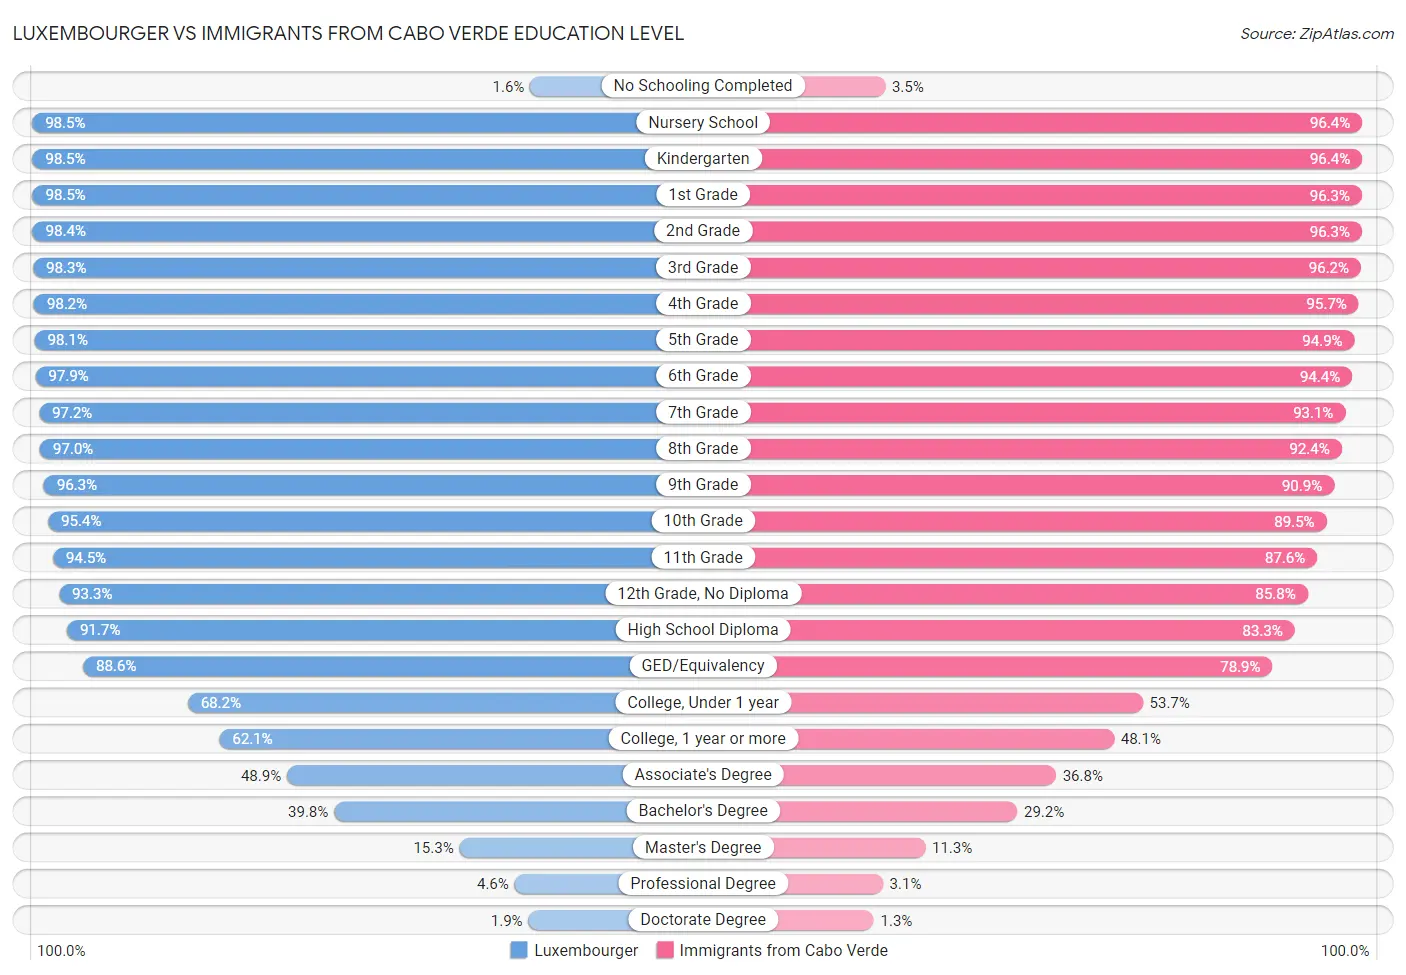 Luxembourger vs Immigrants from Cabo Verde Education Level